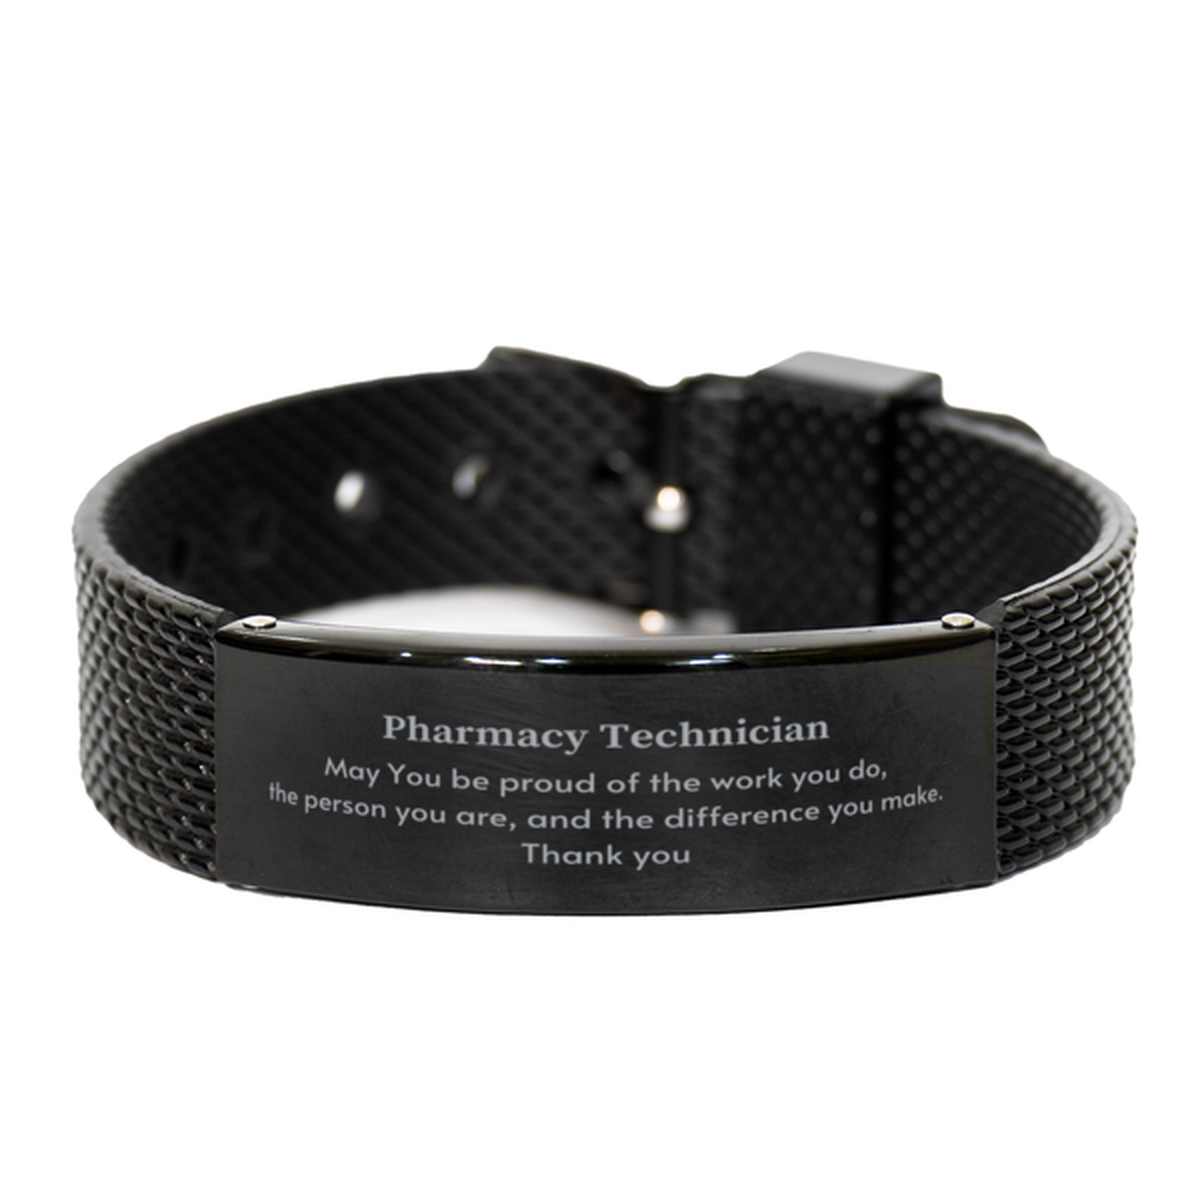 Heartwarming Black Shark Mesh Bracelet Retirement Coworkers Gifts for Pharmacy Technician, Pharmacy Technician May You be proud of the work you do, the person you are Gifts for Boss Men Women Friends